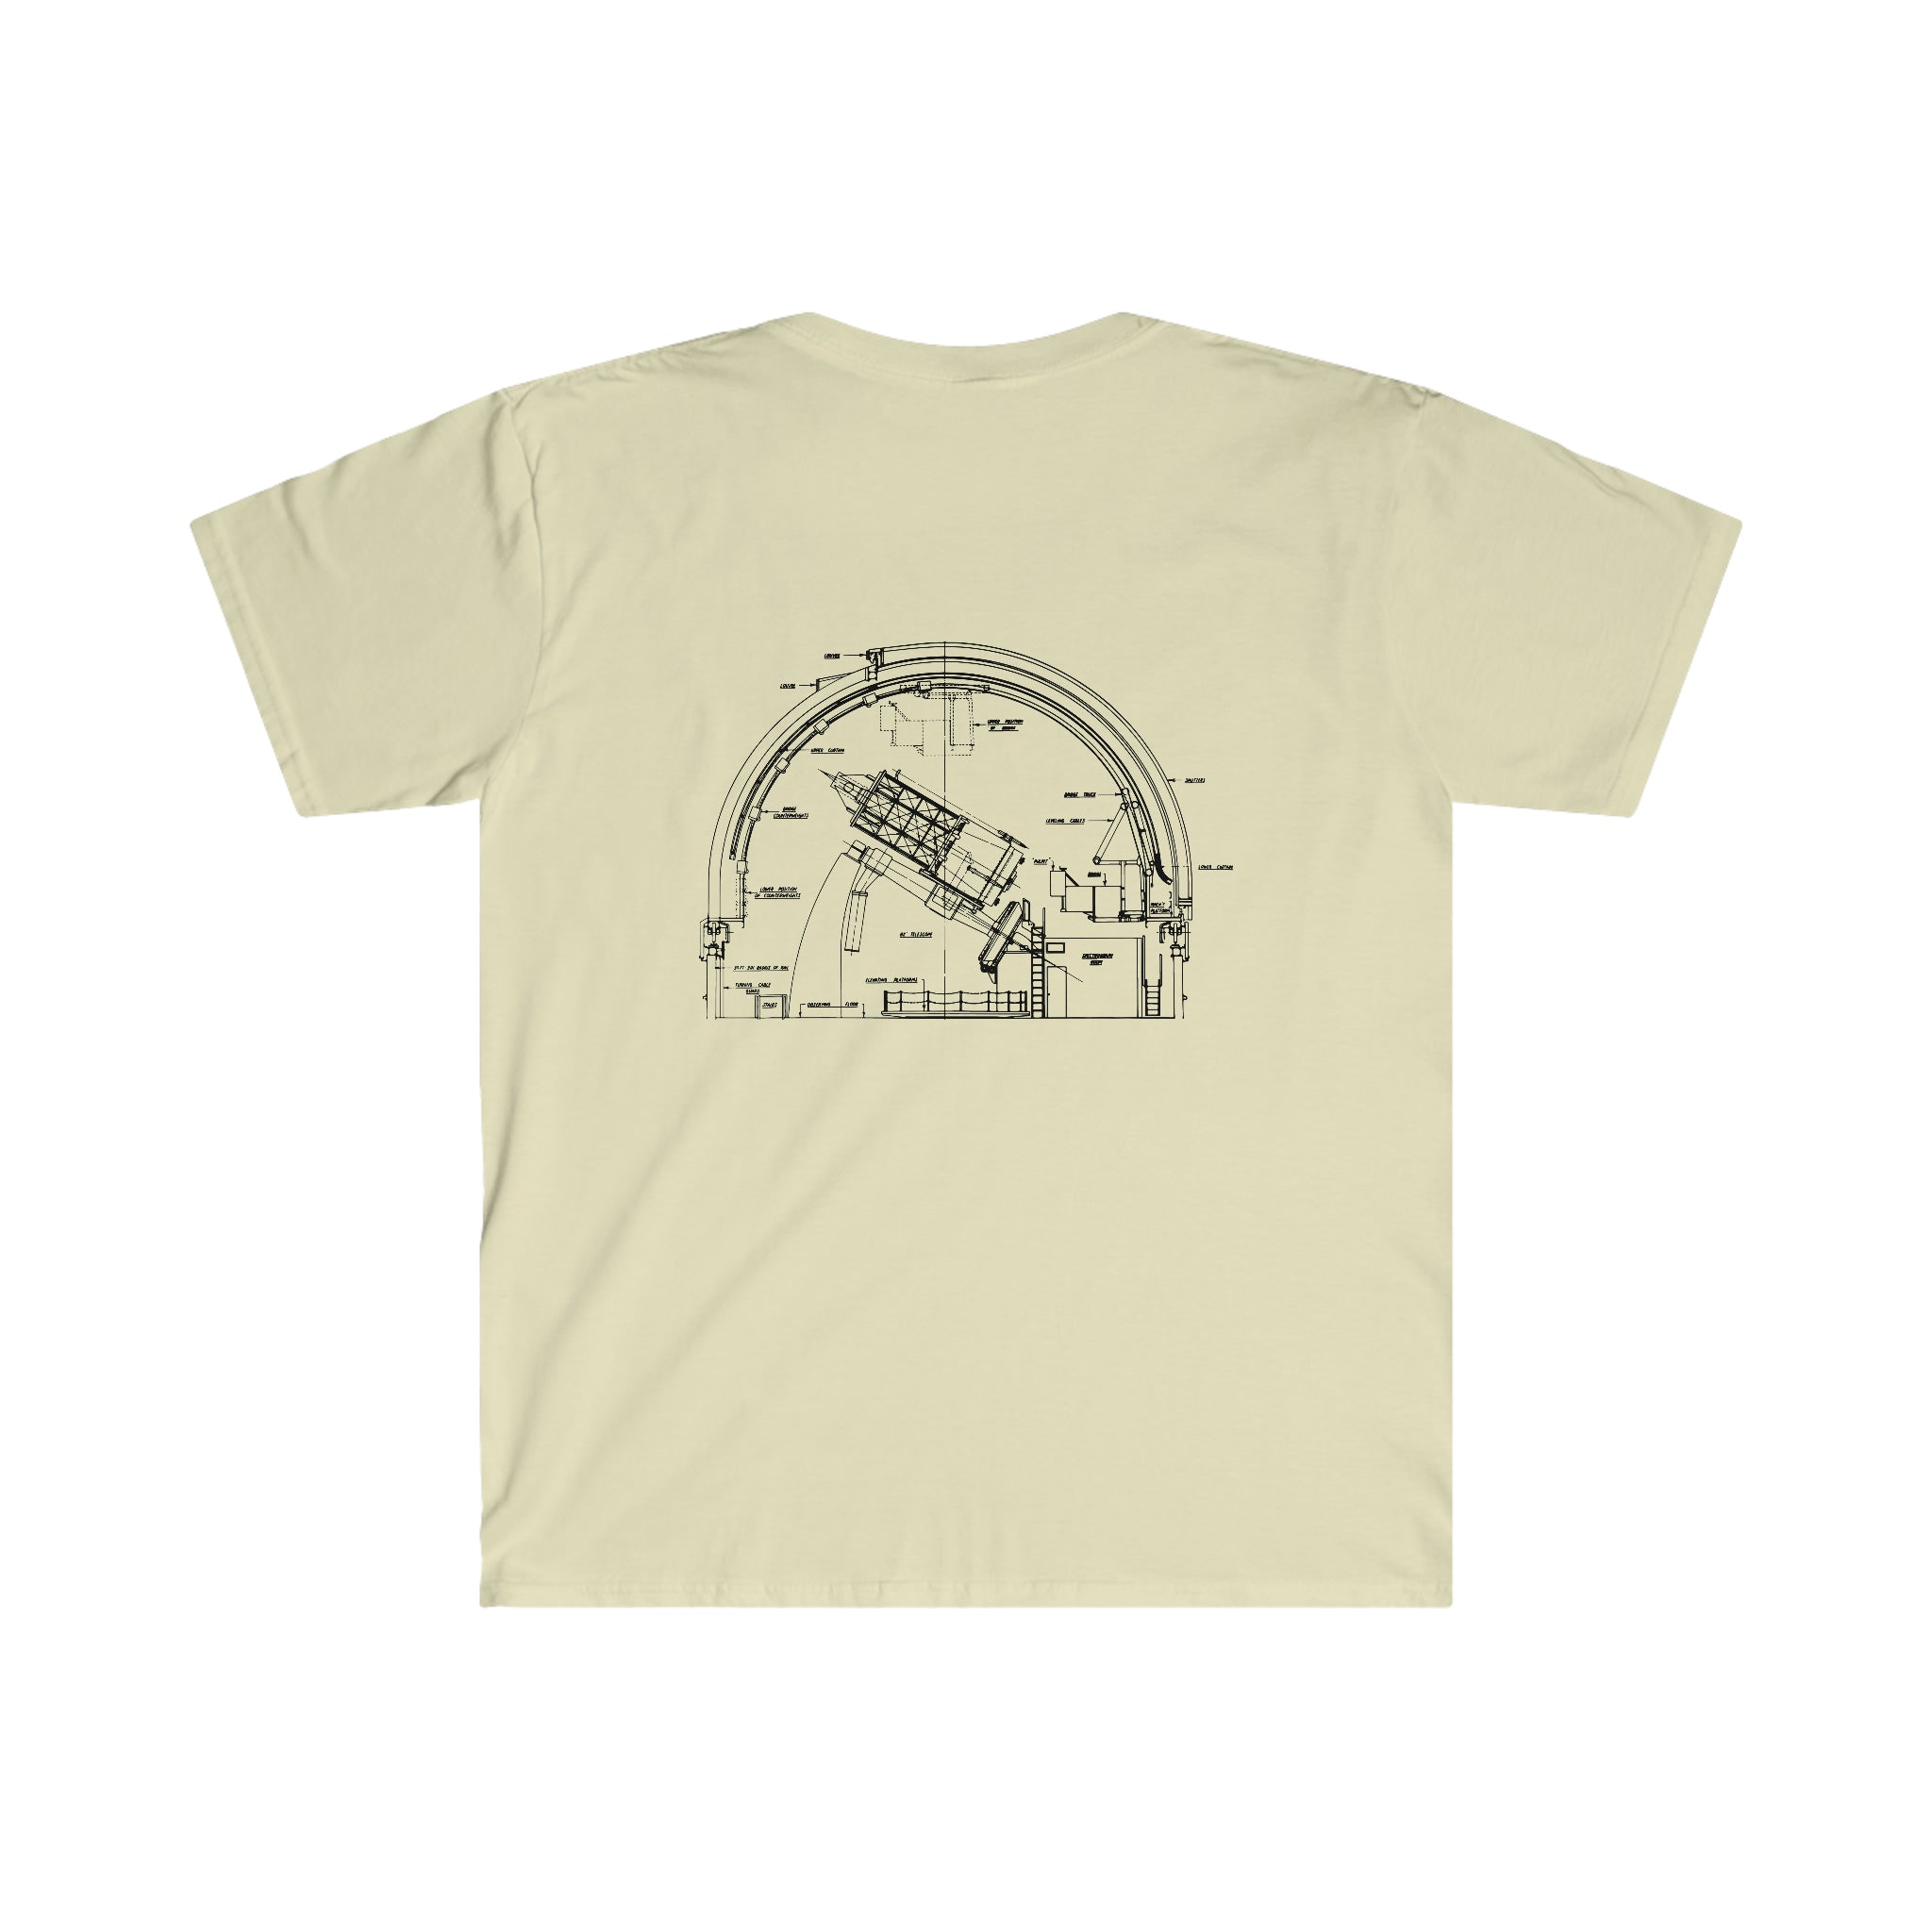 A Space is Waiting T-Shirt with a machine drawing.